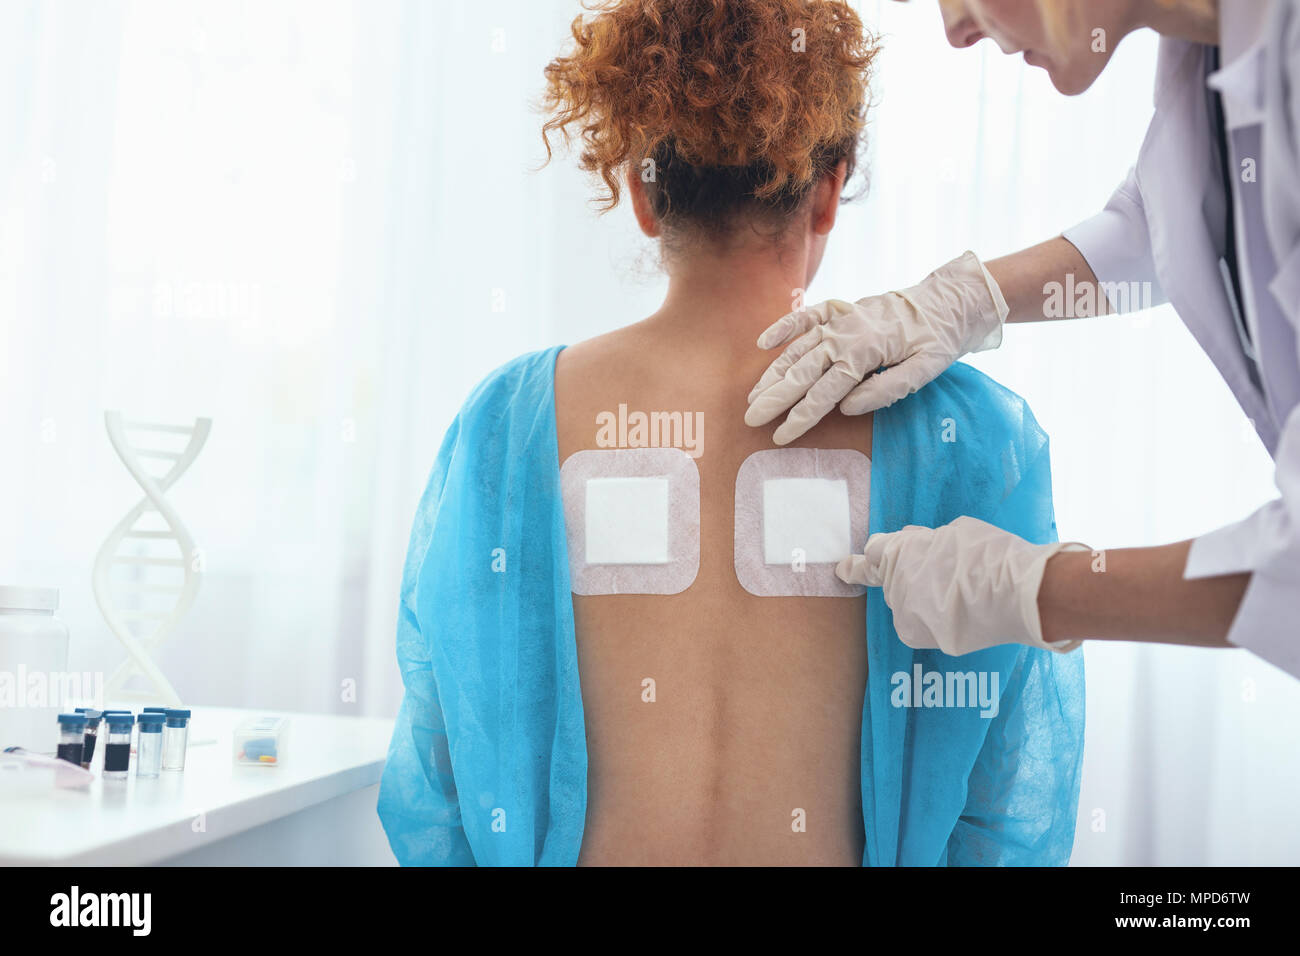 Young lady being given orthopaedic attention Stock Photo